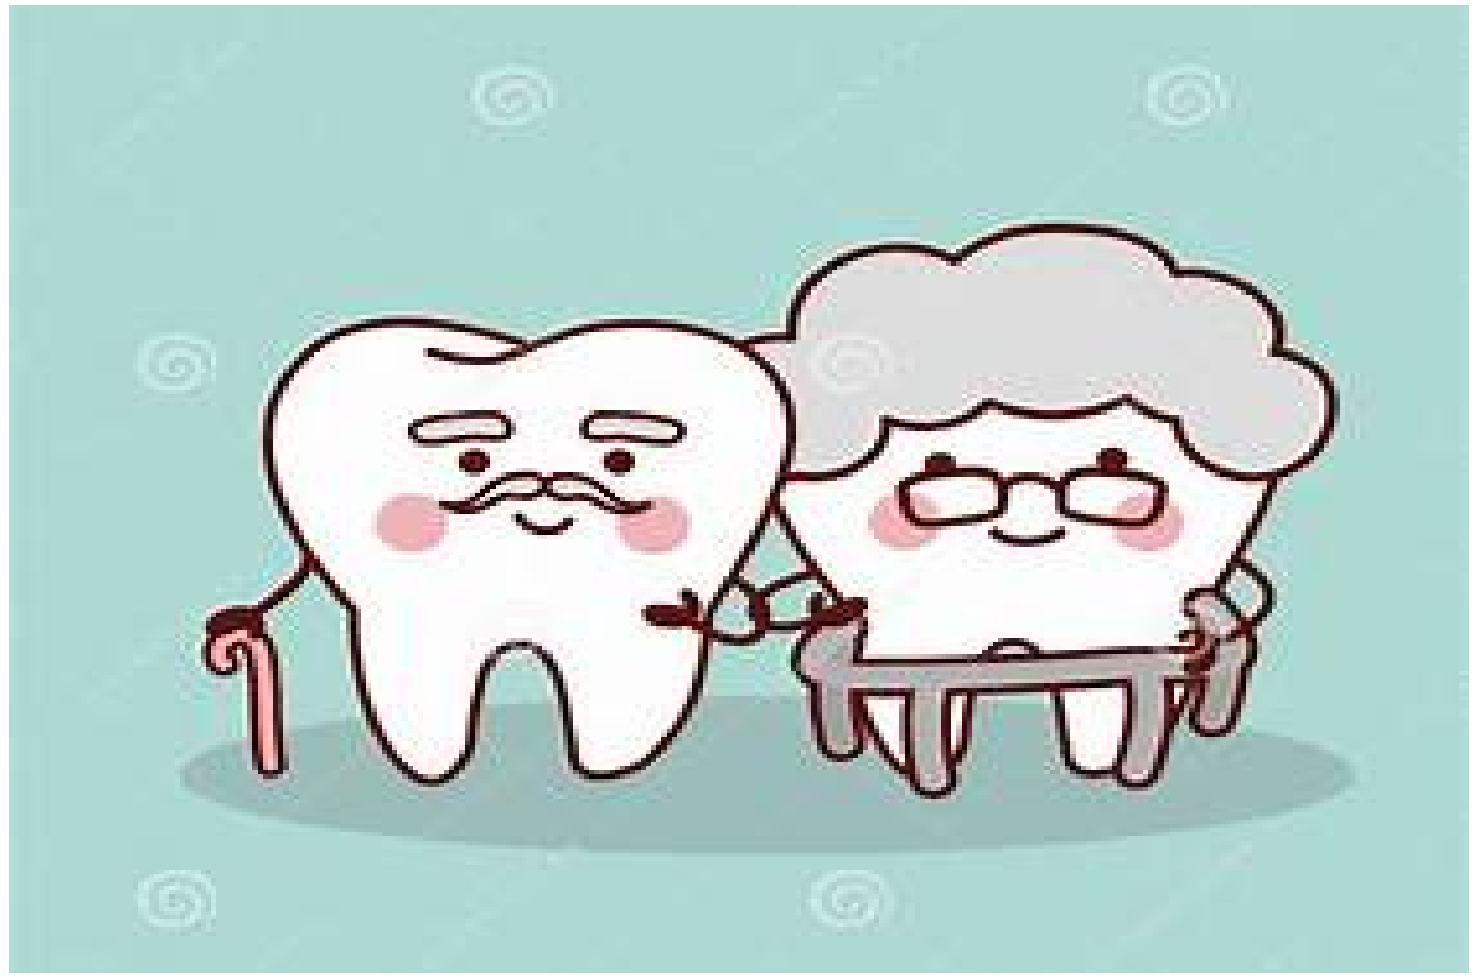 Dental Care while ageing is very important